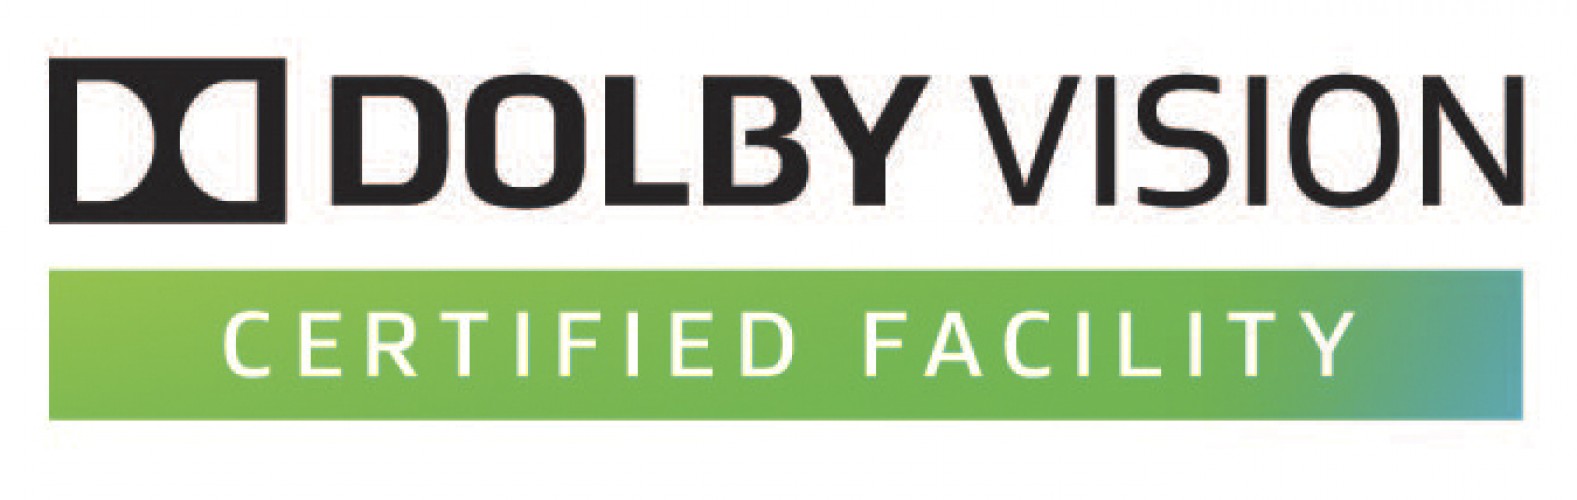 dolby-vision-certified-facility